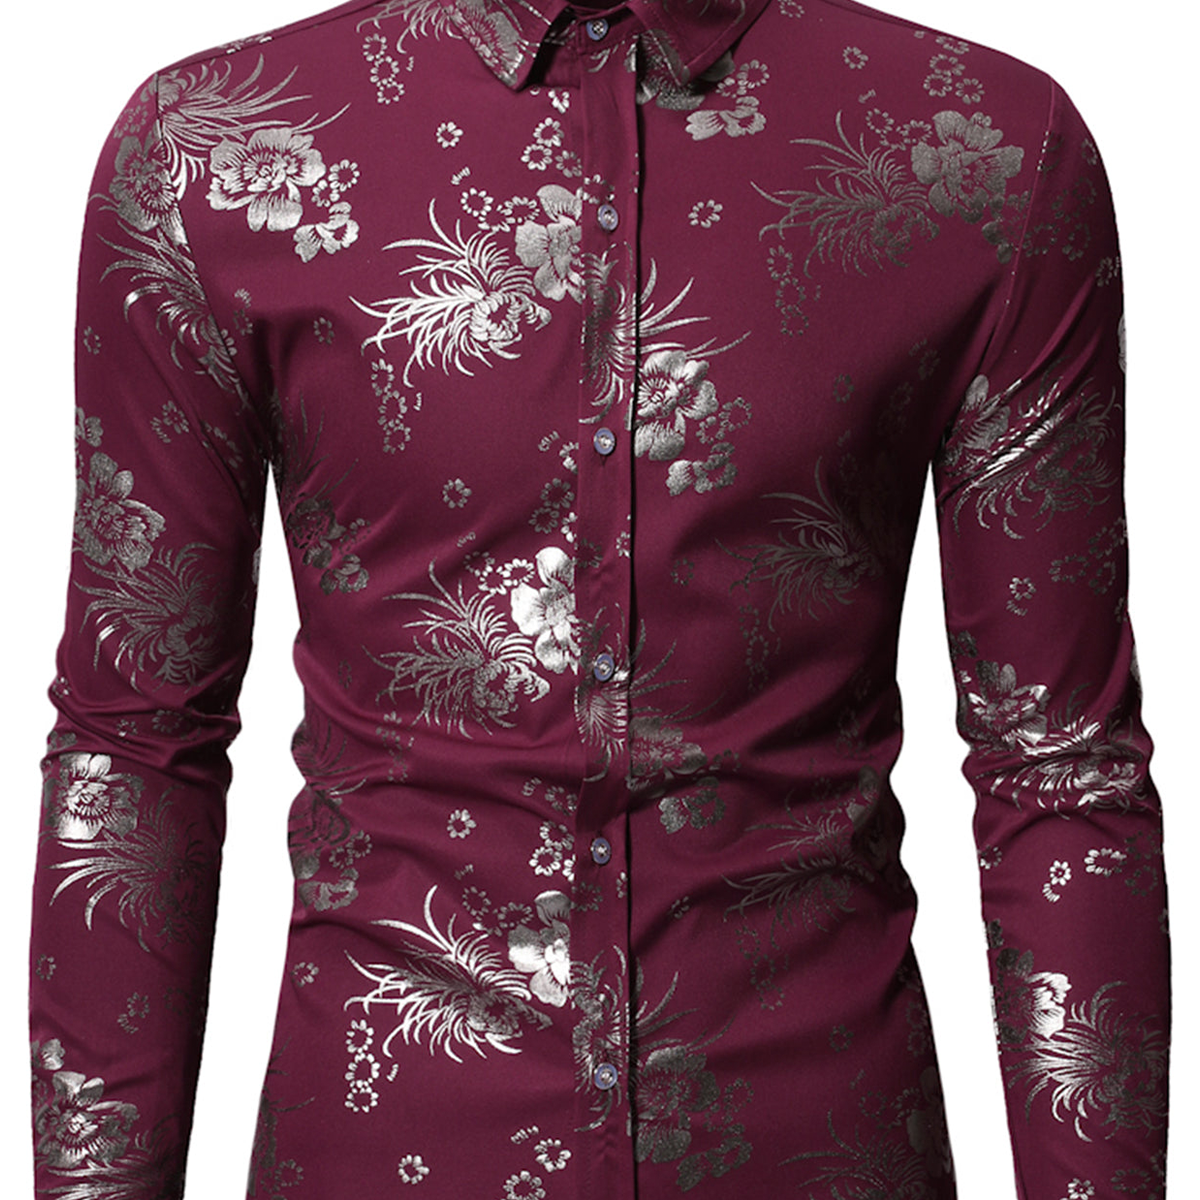 Men's Floral Long Sleeve Casual Button Up Shirt